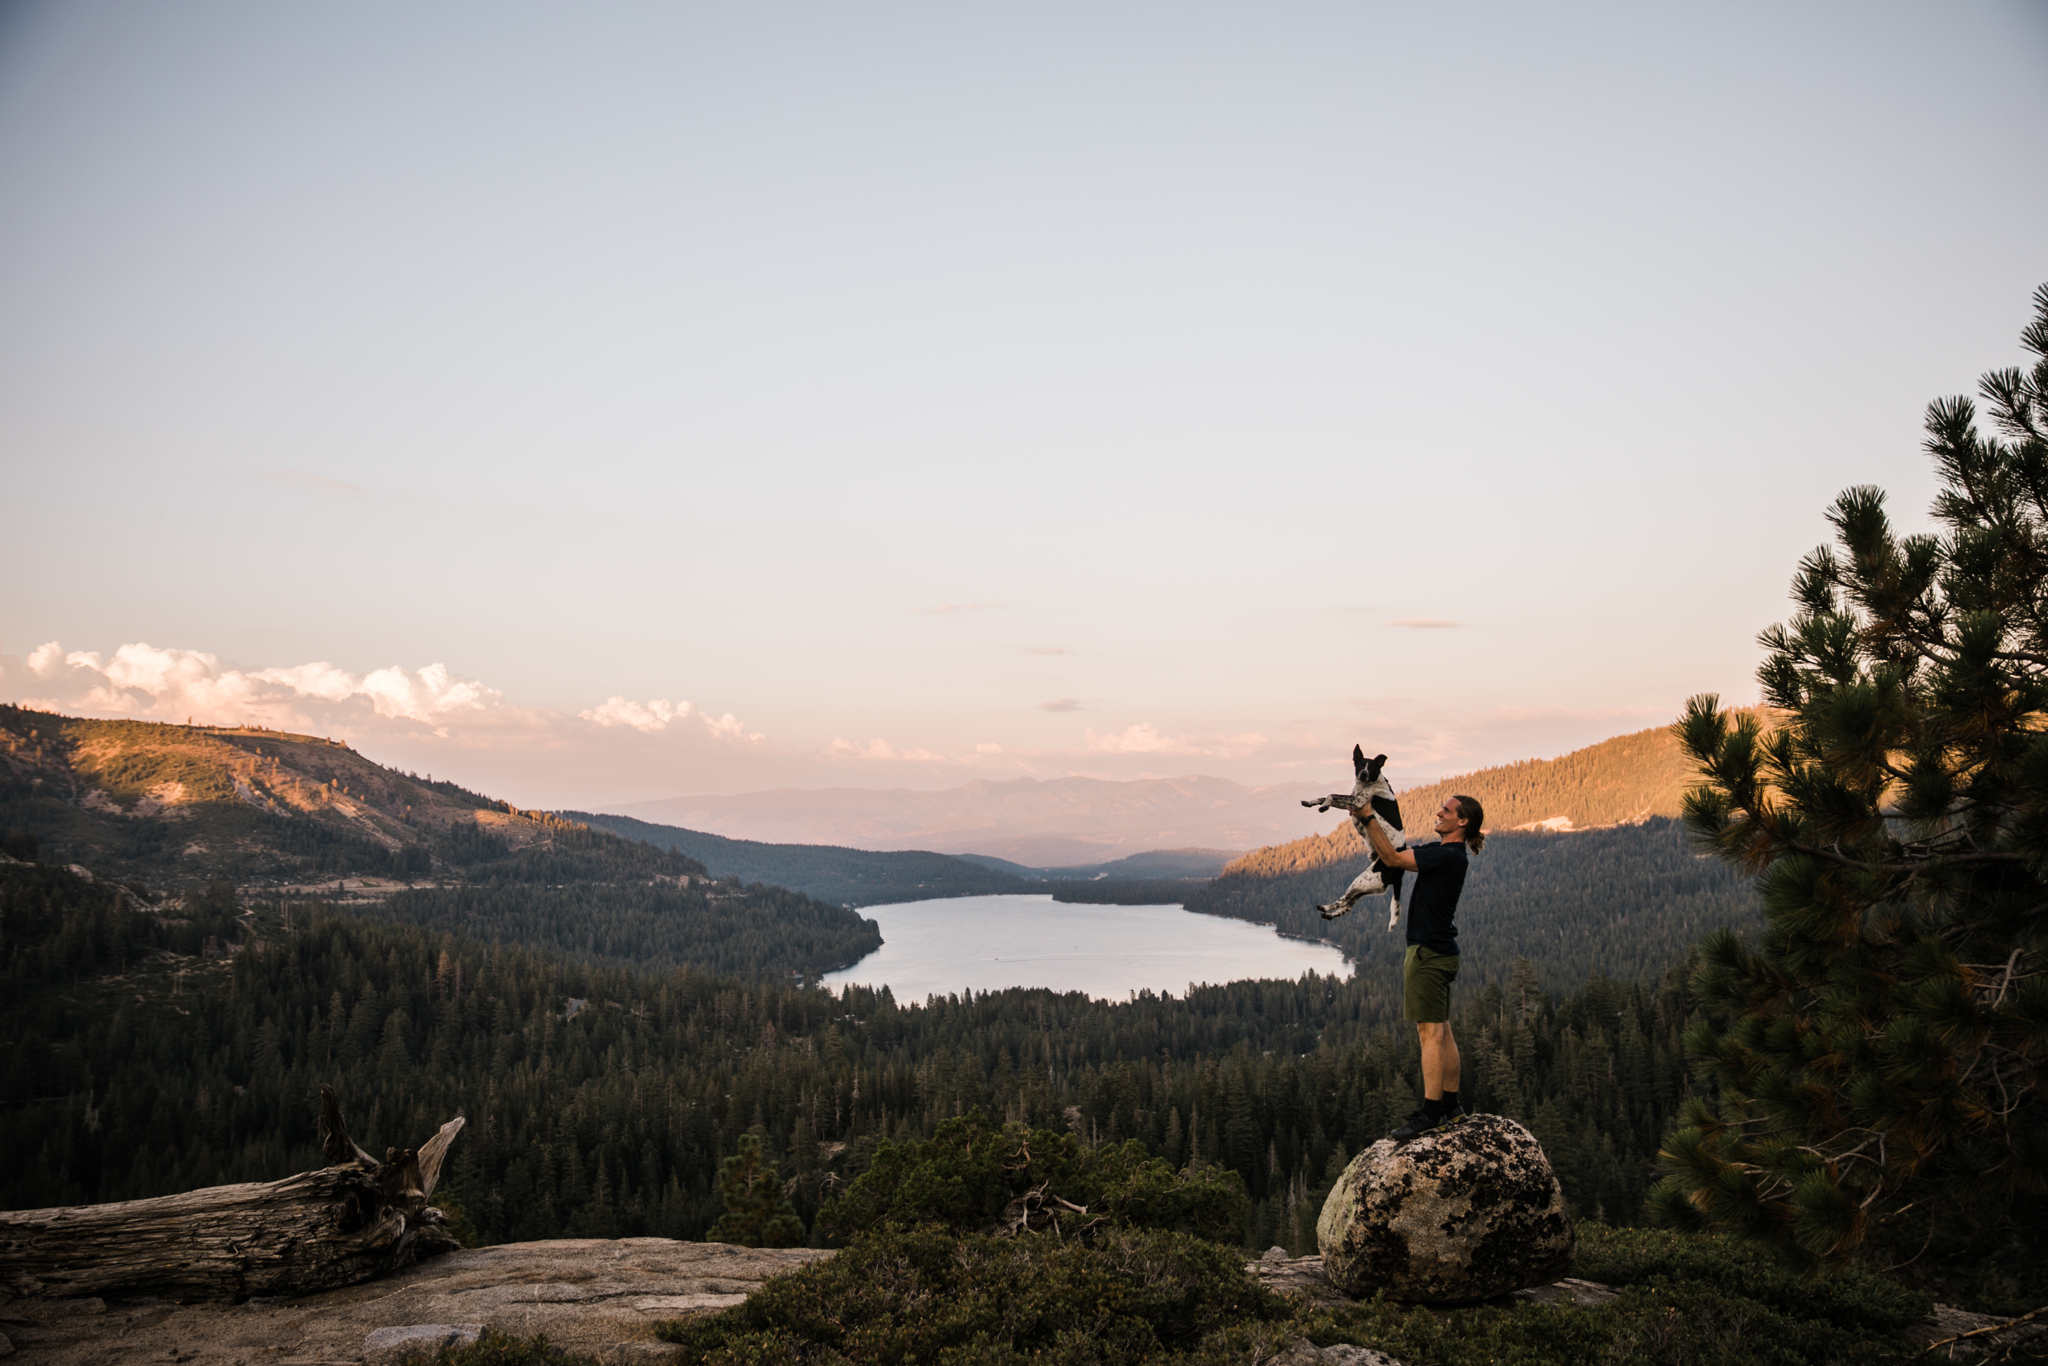 donner lake sunset | utah and california adventure elopement photographers | the hearnes adventure photography | www.thehearnes.com